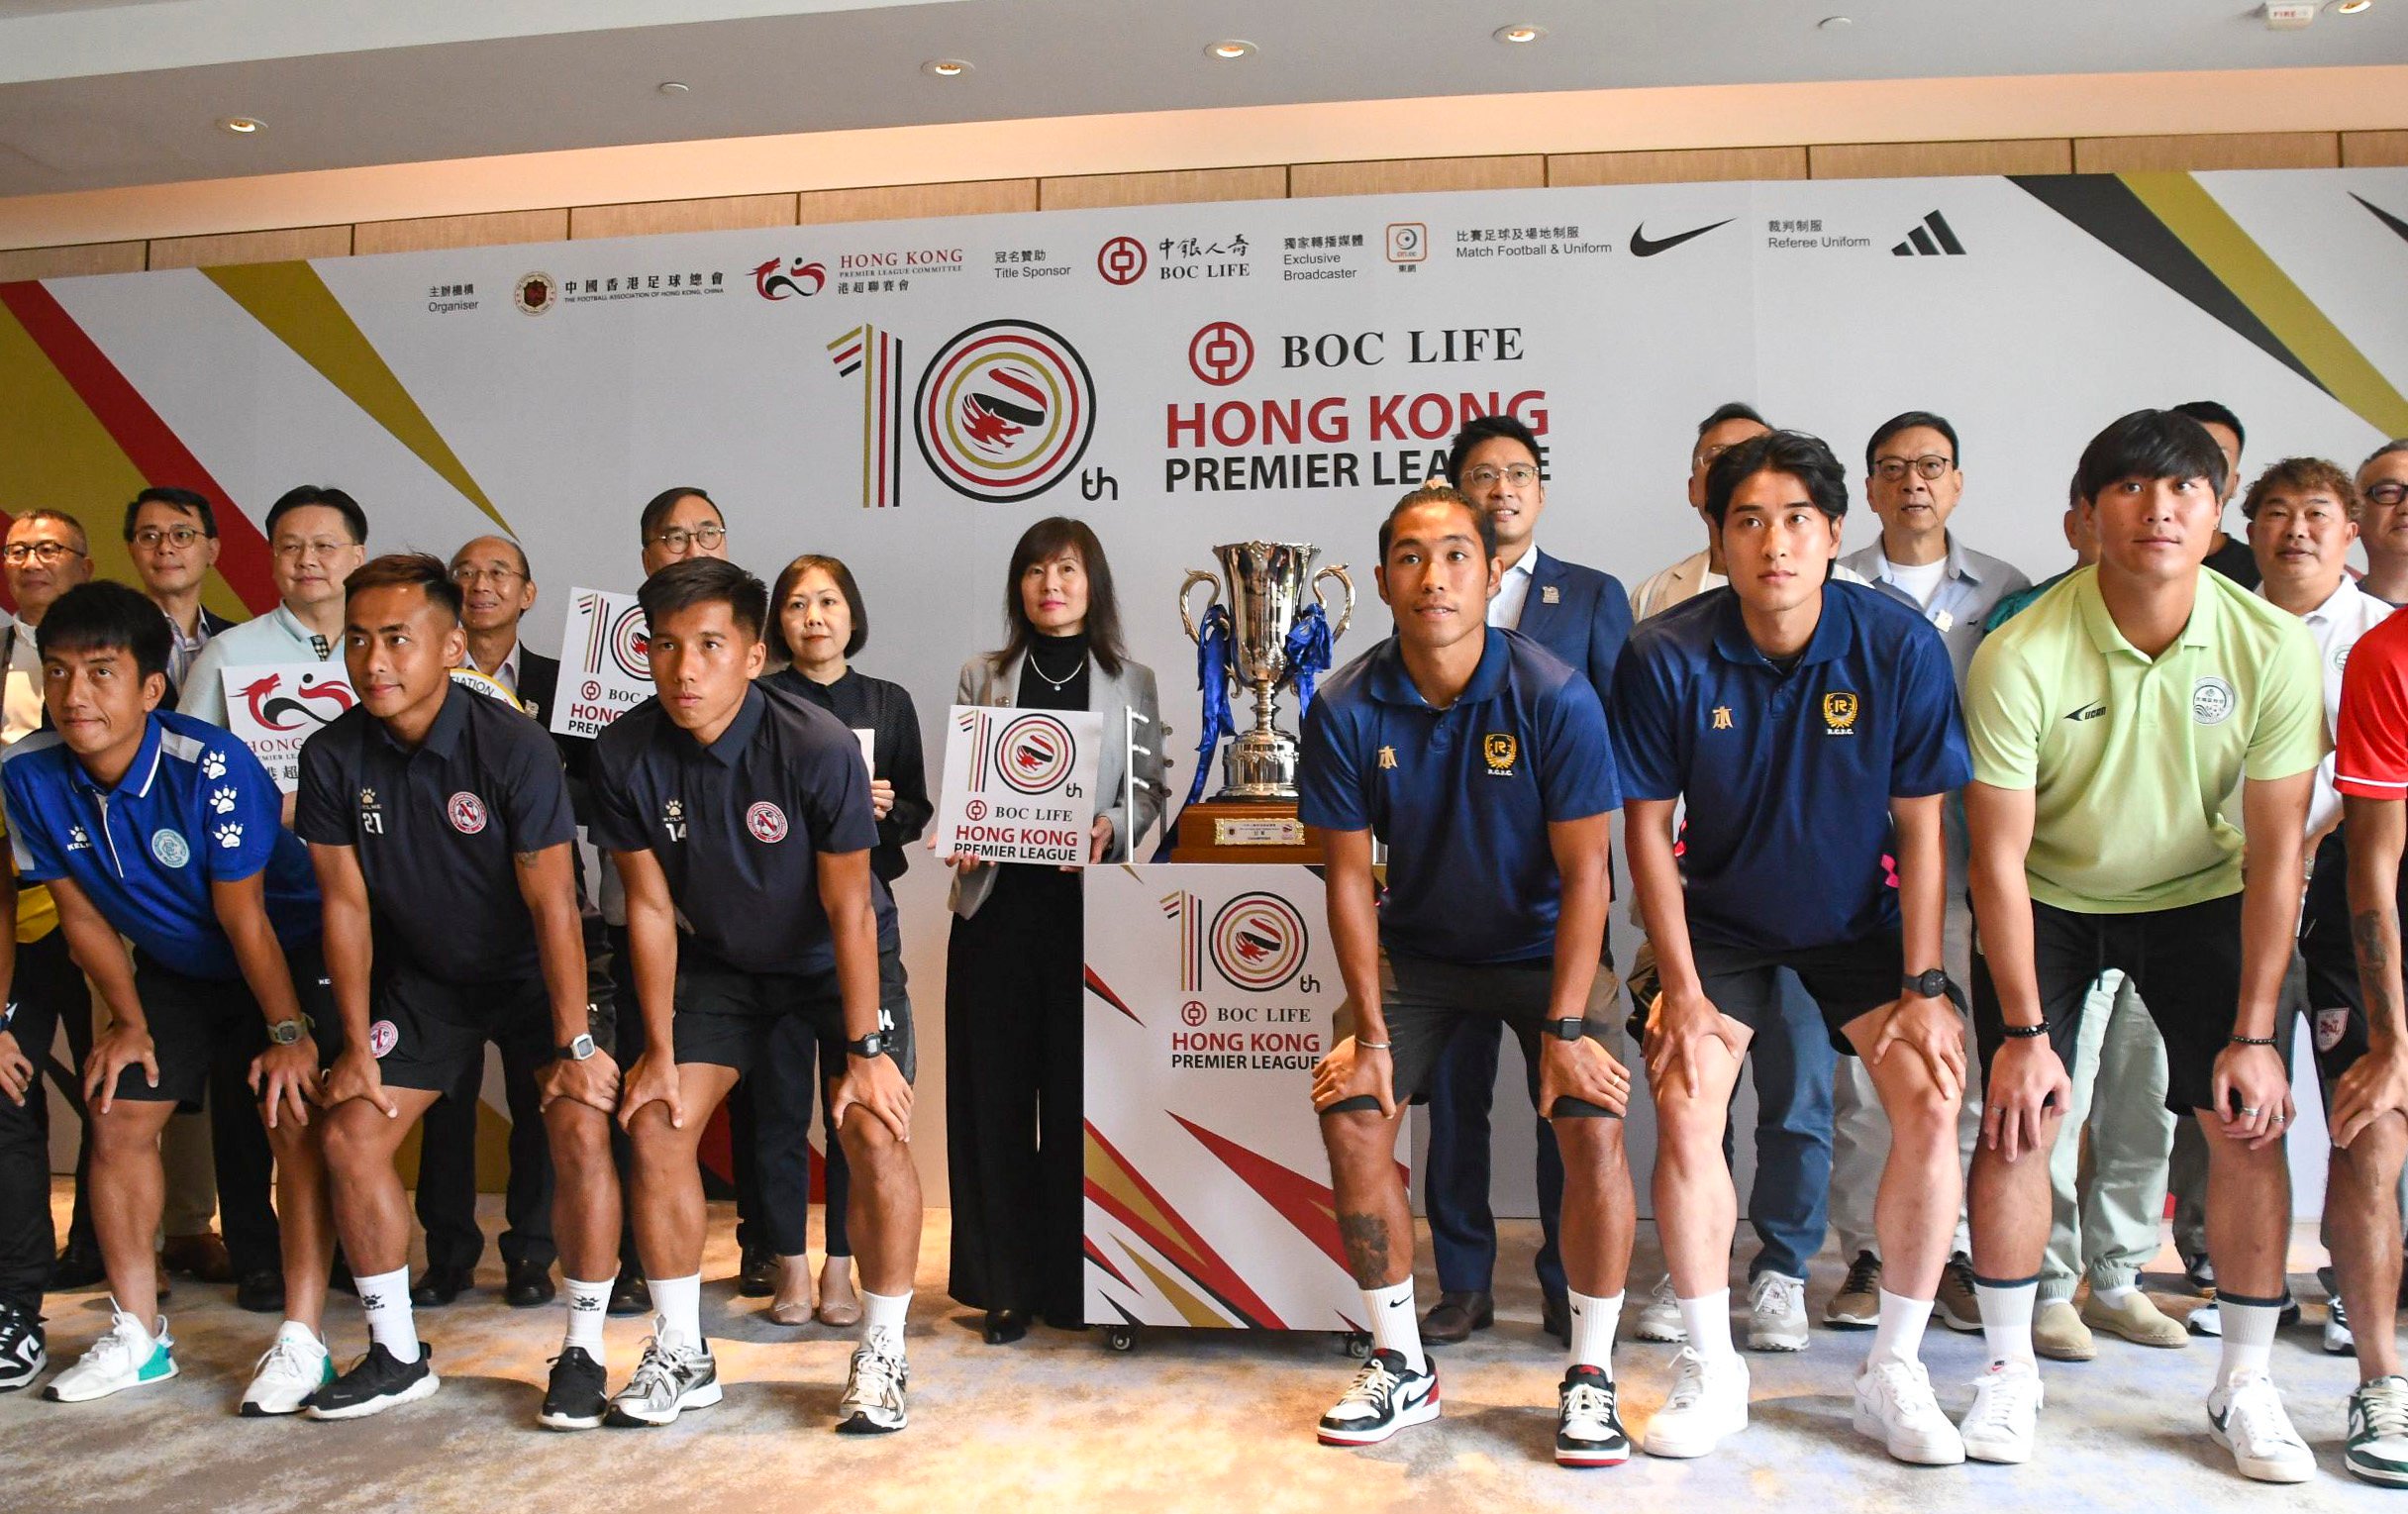 VAR will be introduced for the first time this season in the Hong Kong Premier League, which held an opening ceremony on Friday. Photo: Handout